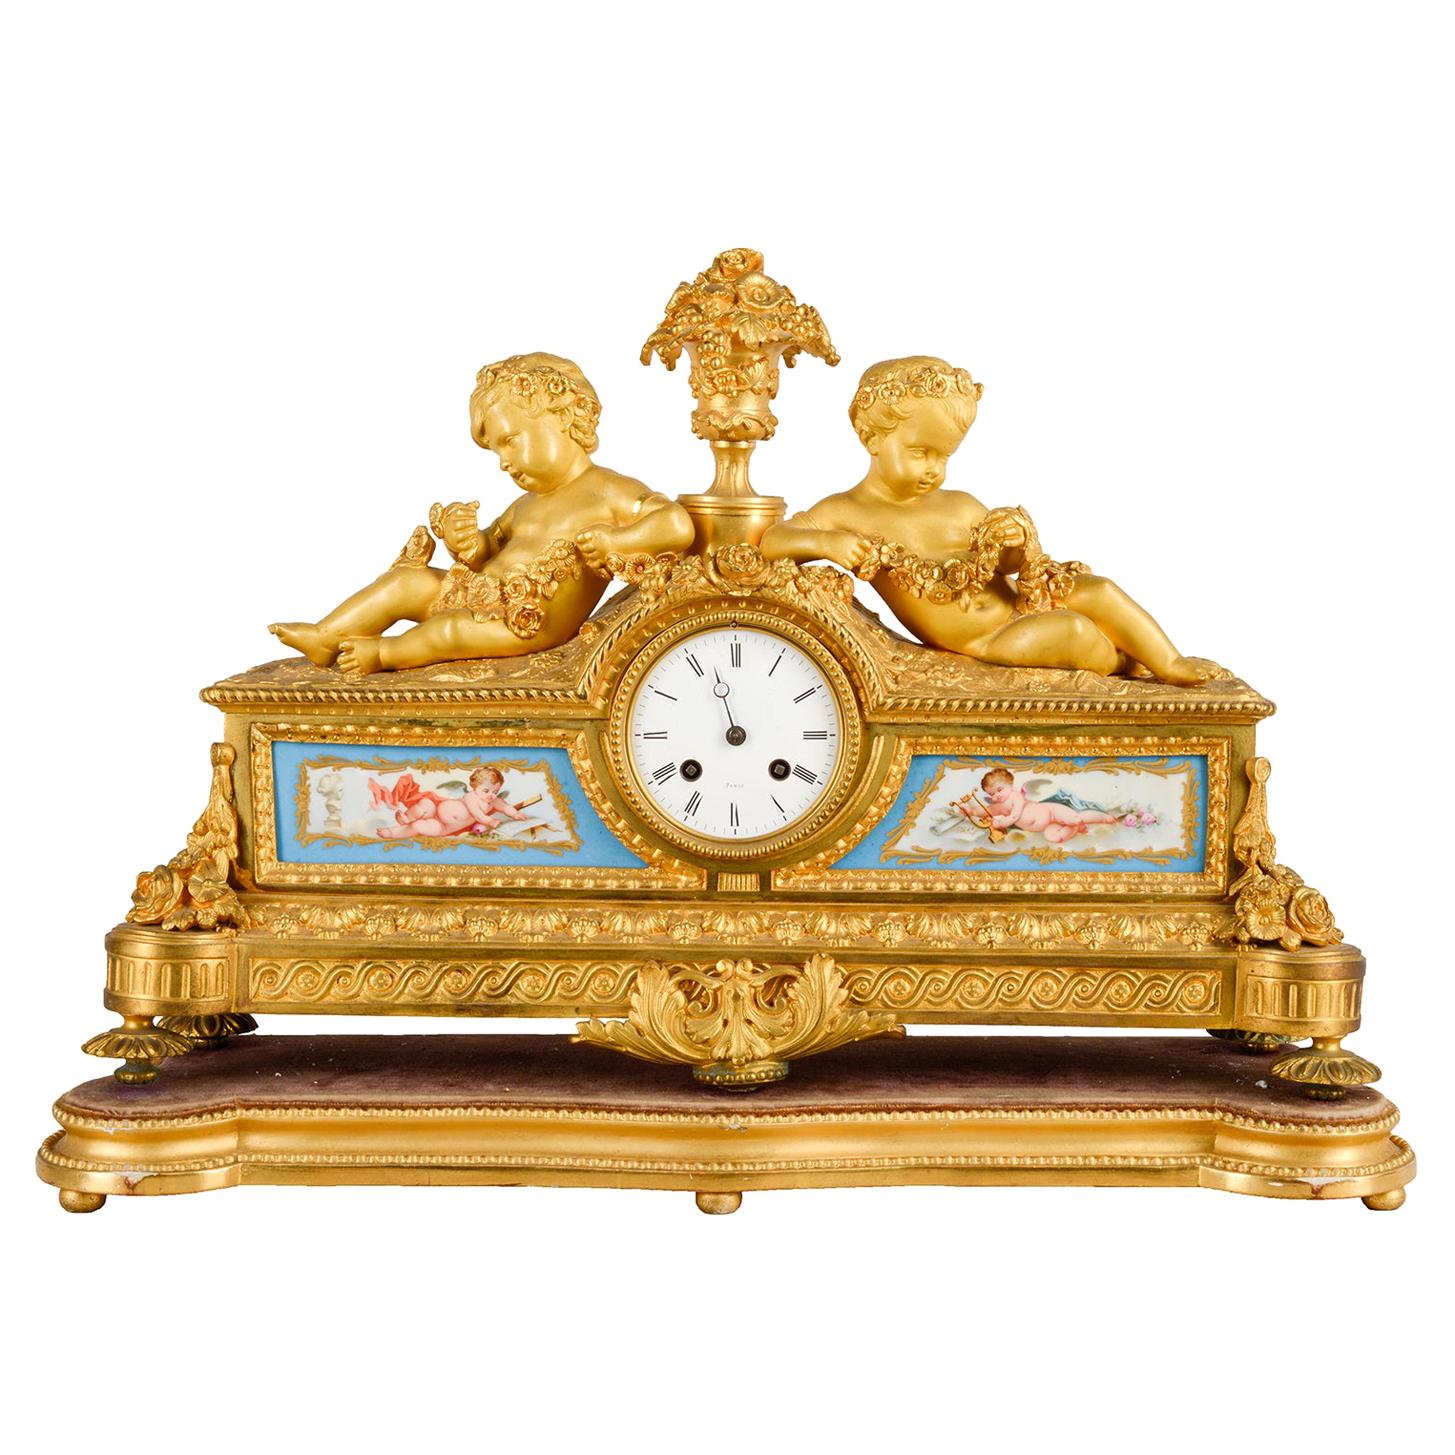 Louis XVI, Ormolu and Sevres Style Mantle Clock, 19th Century